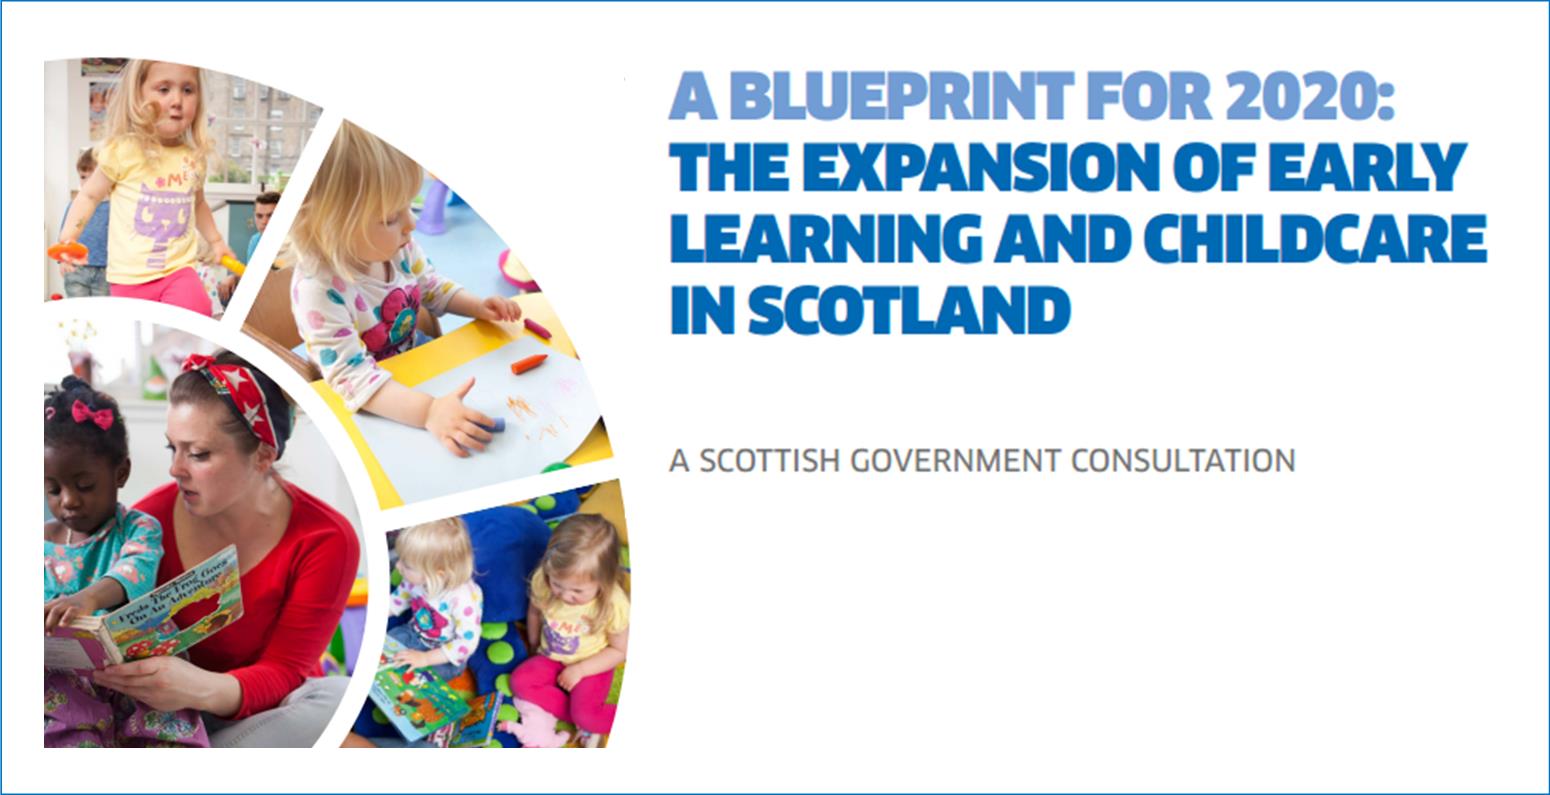 A Blueprint for 2020: the expansion of Early Learning and Childcare in Scotland